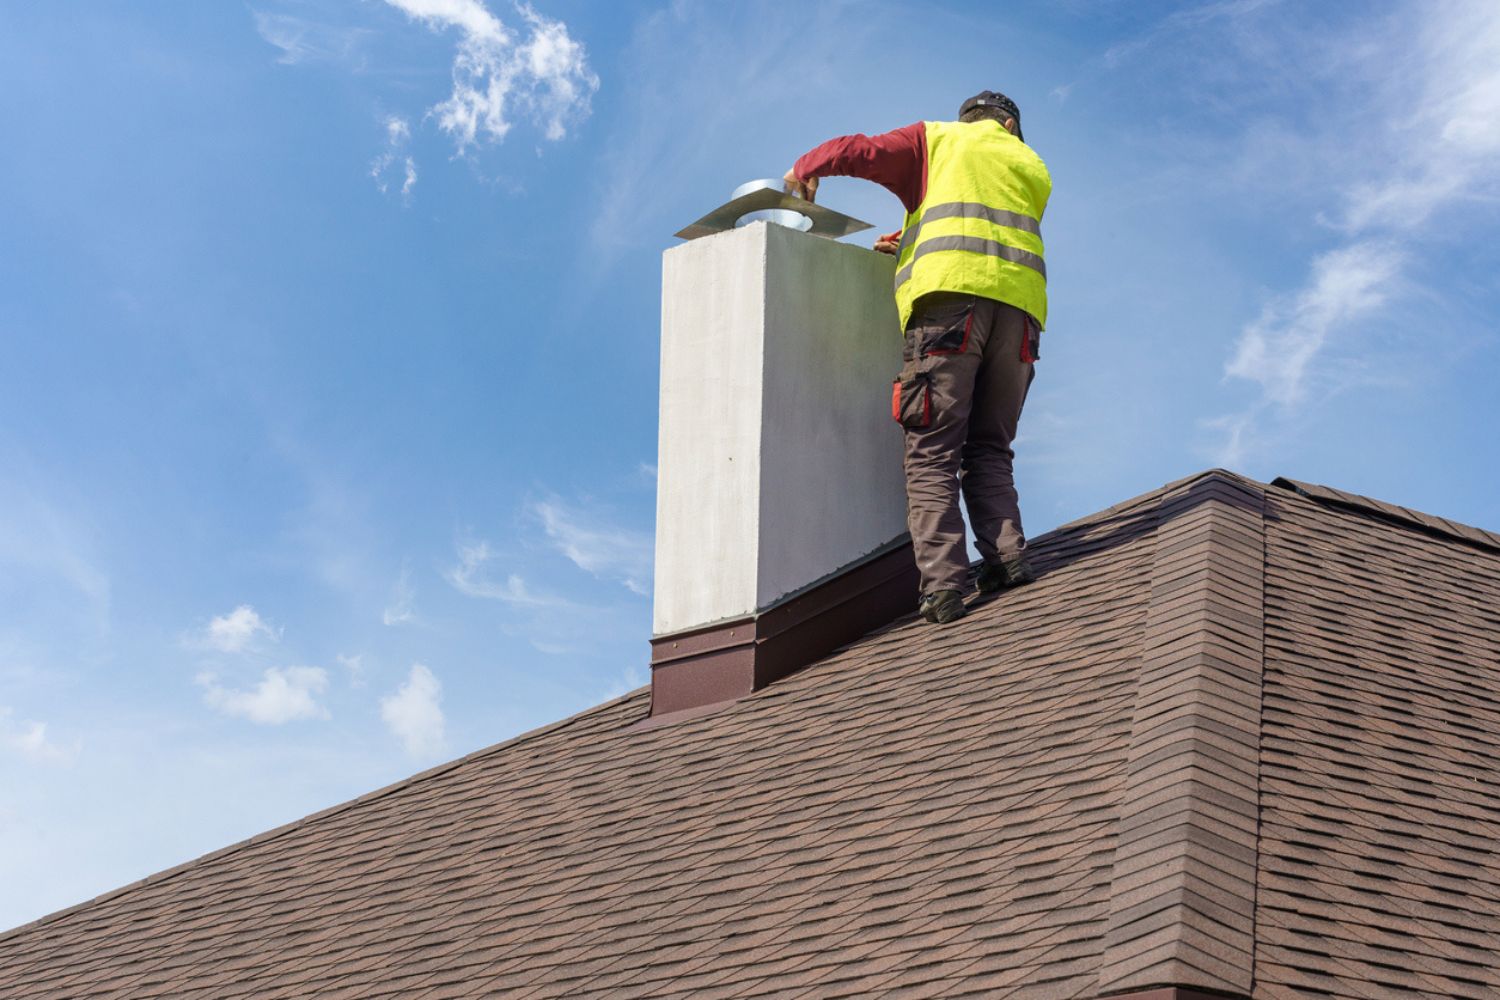 How Much Does Chimney Inspection Cost